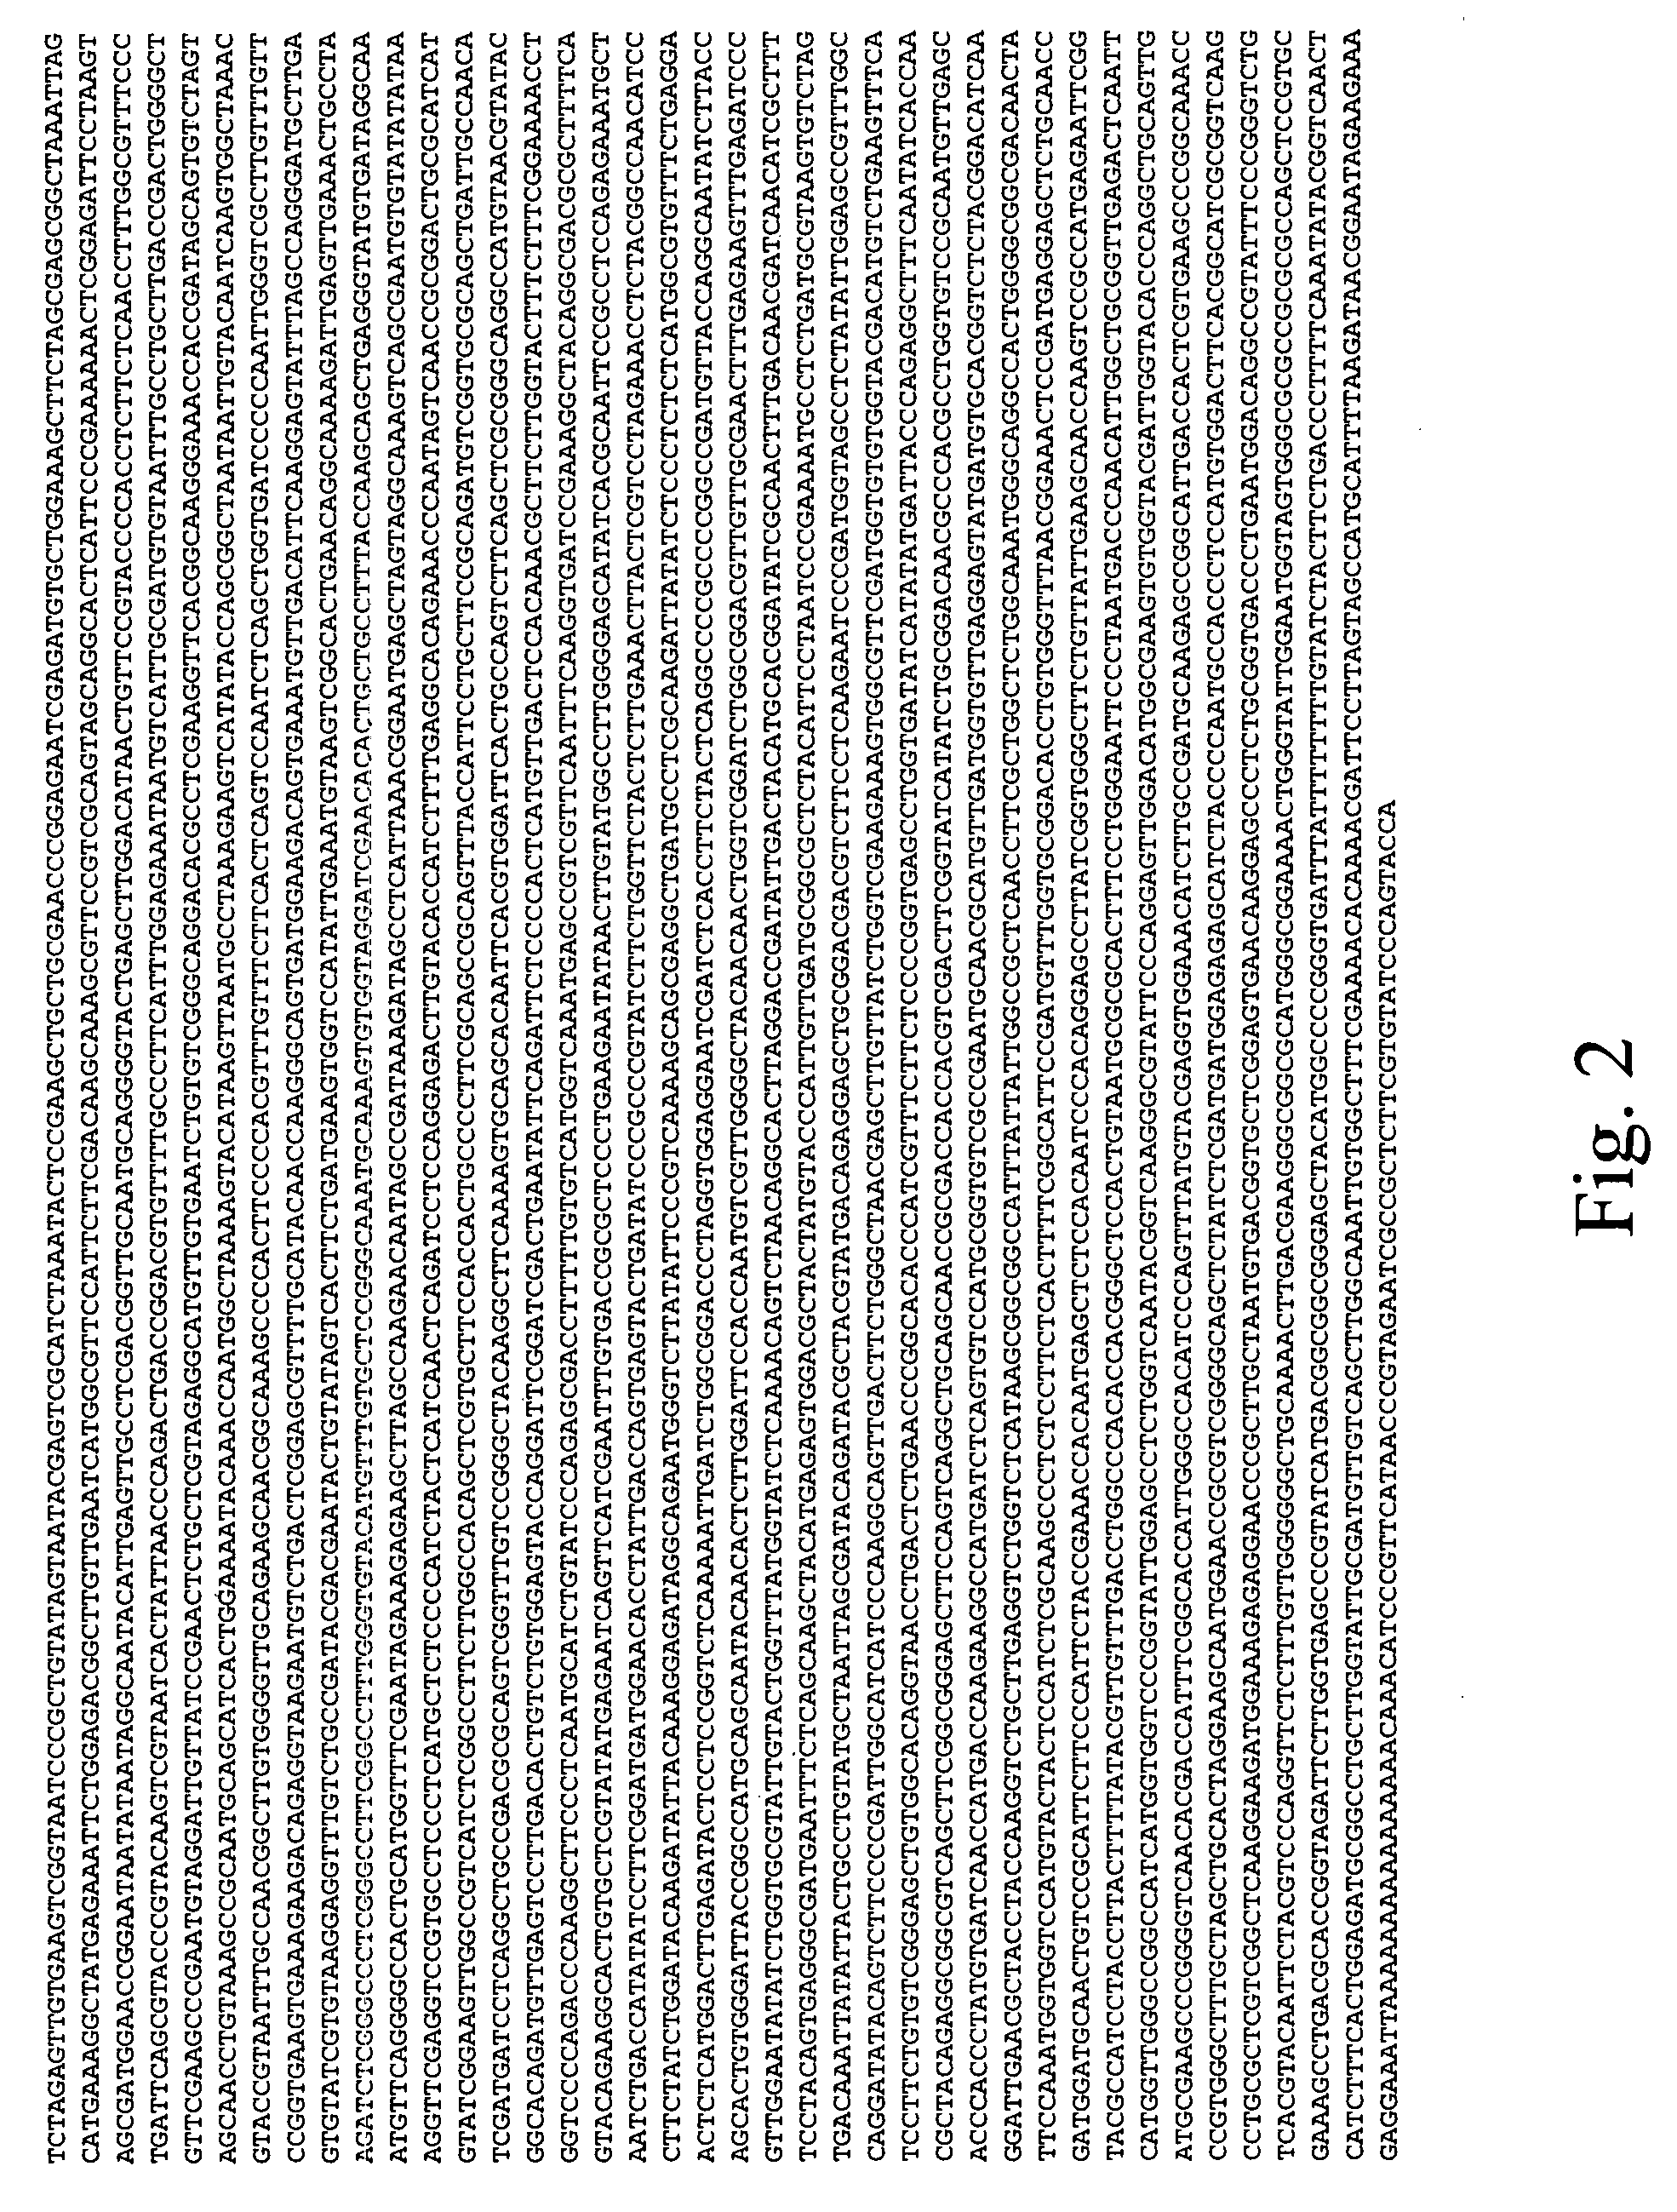 Cleaning compositions comprising transglucosidase